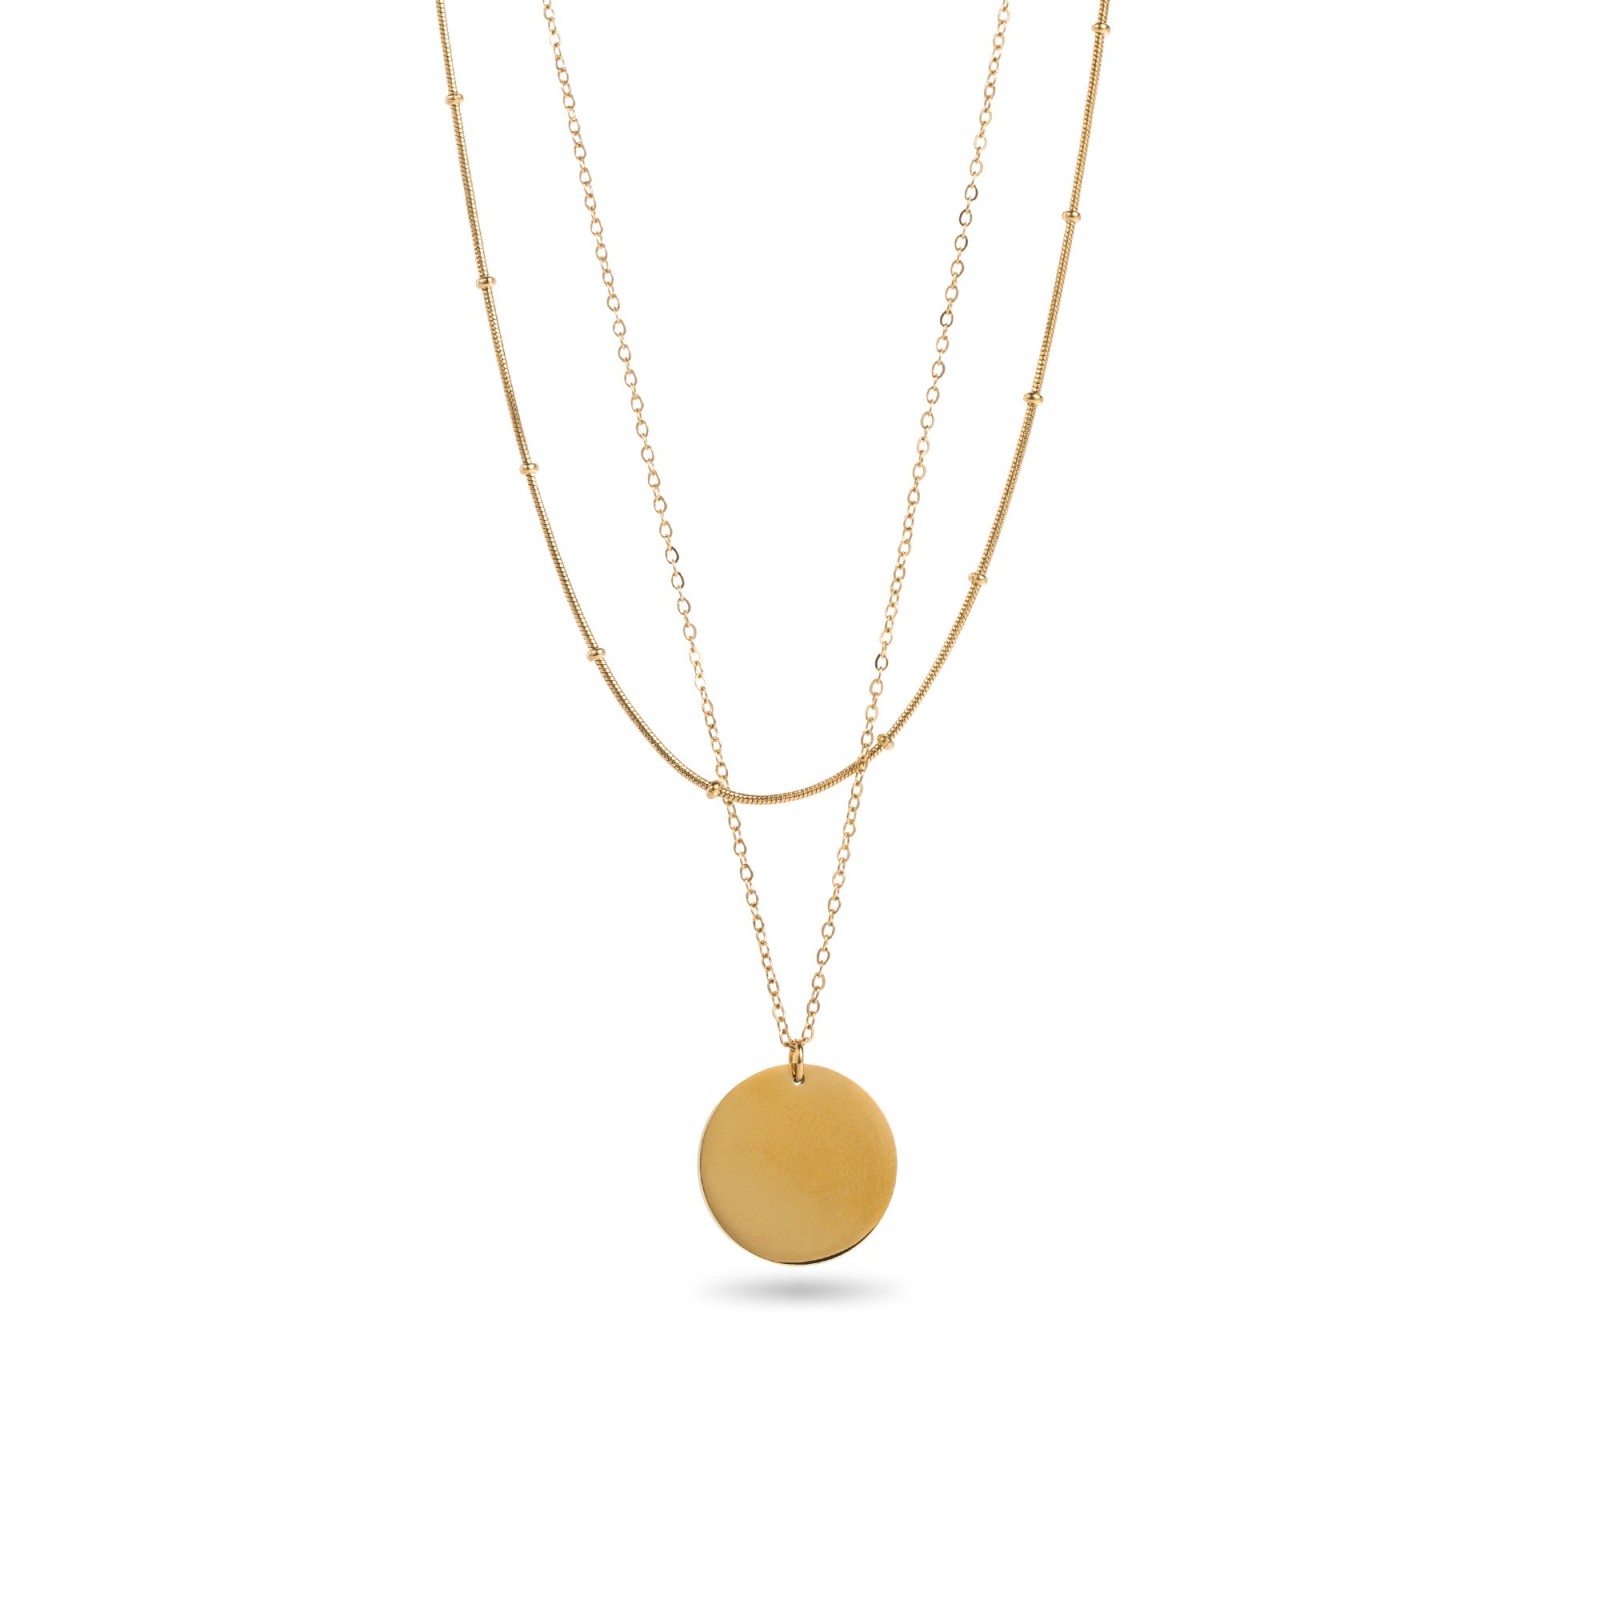 Double Chain Necklace with Tassel Color:Gold